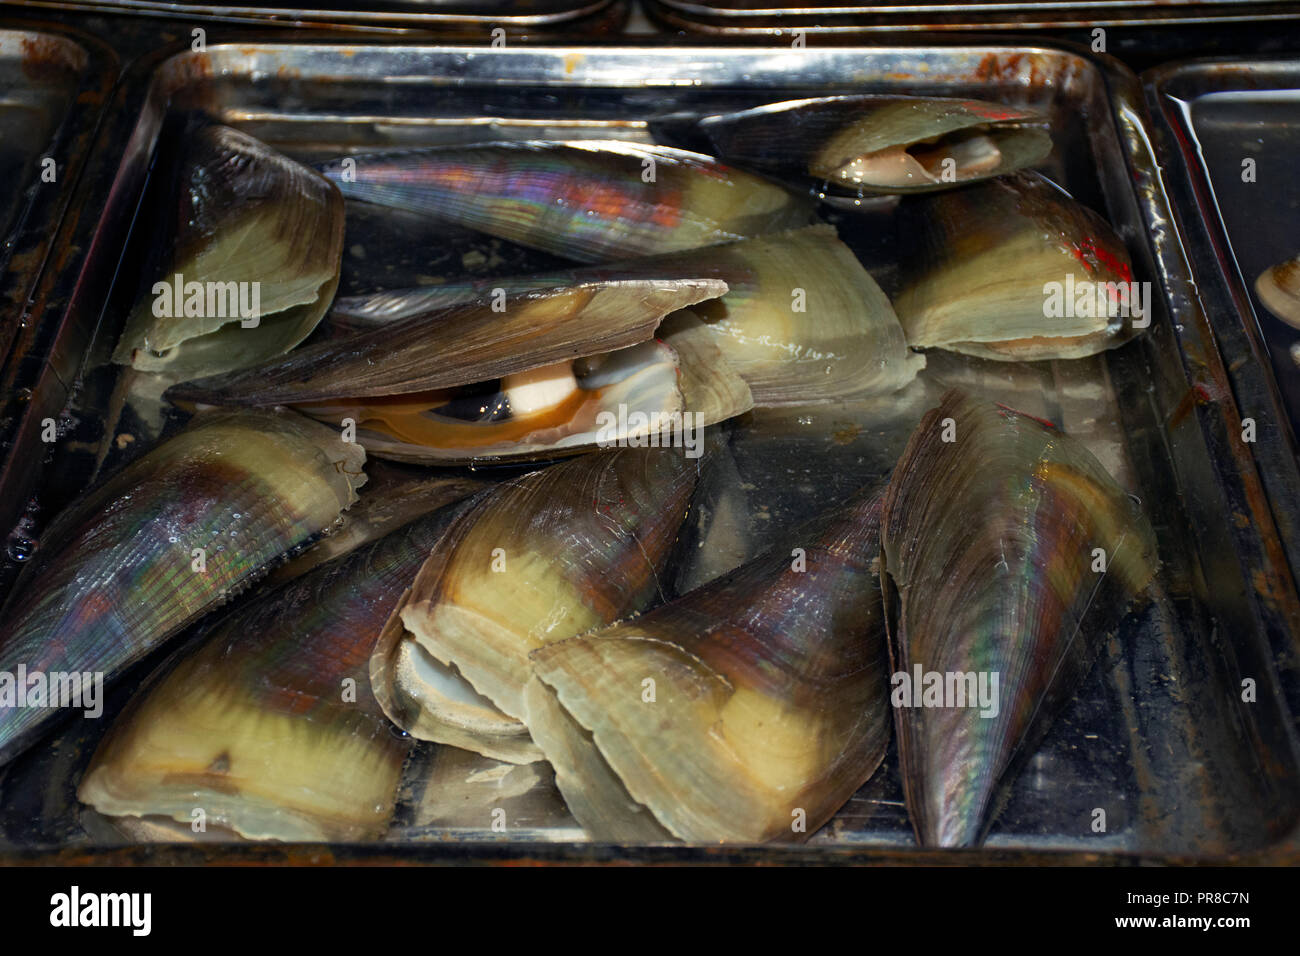 Abalones for sale on a Seafood market in Haikou, Hainan Island, China Stock Photo